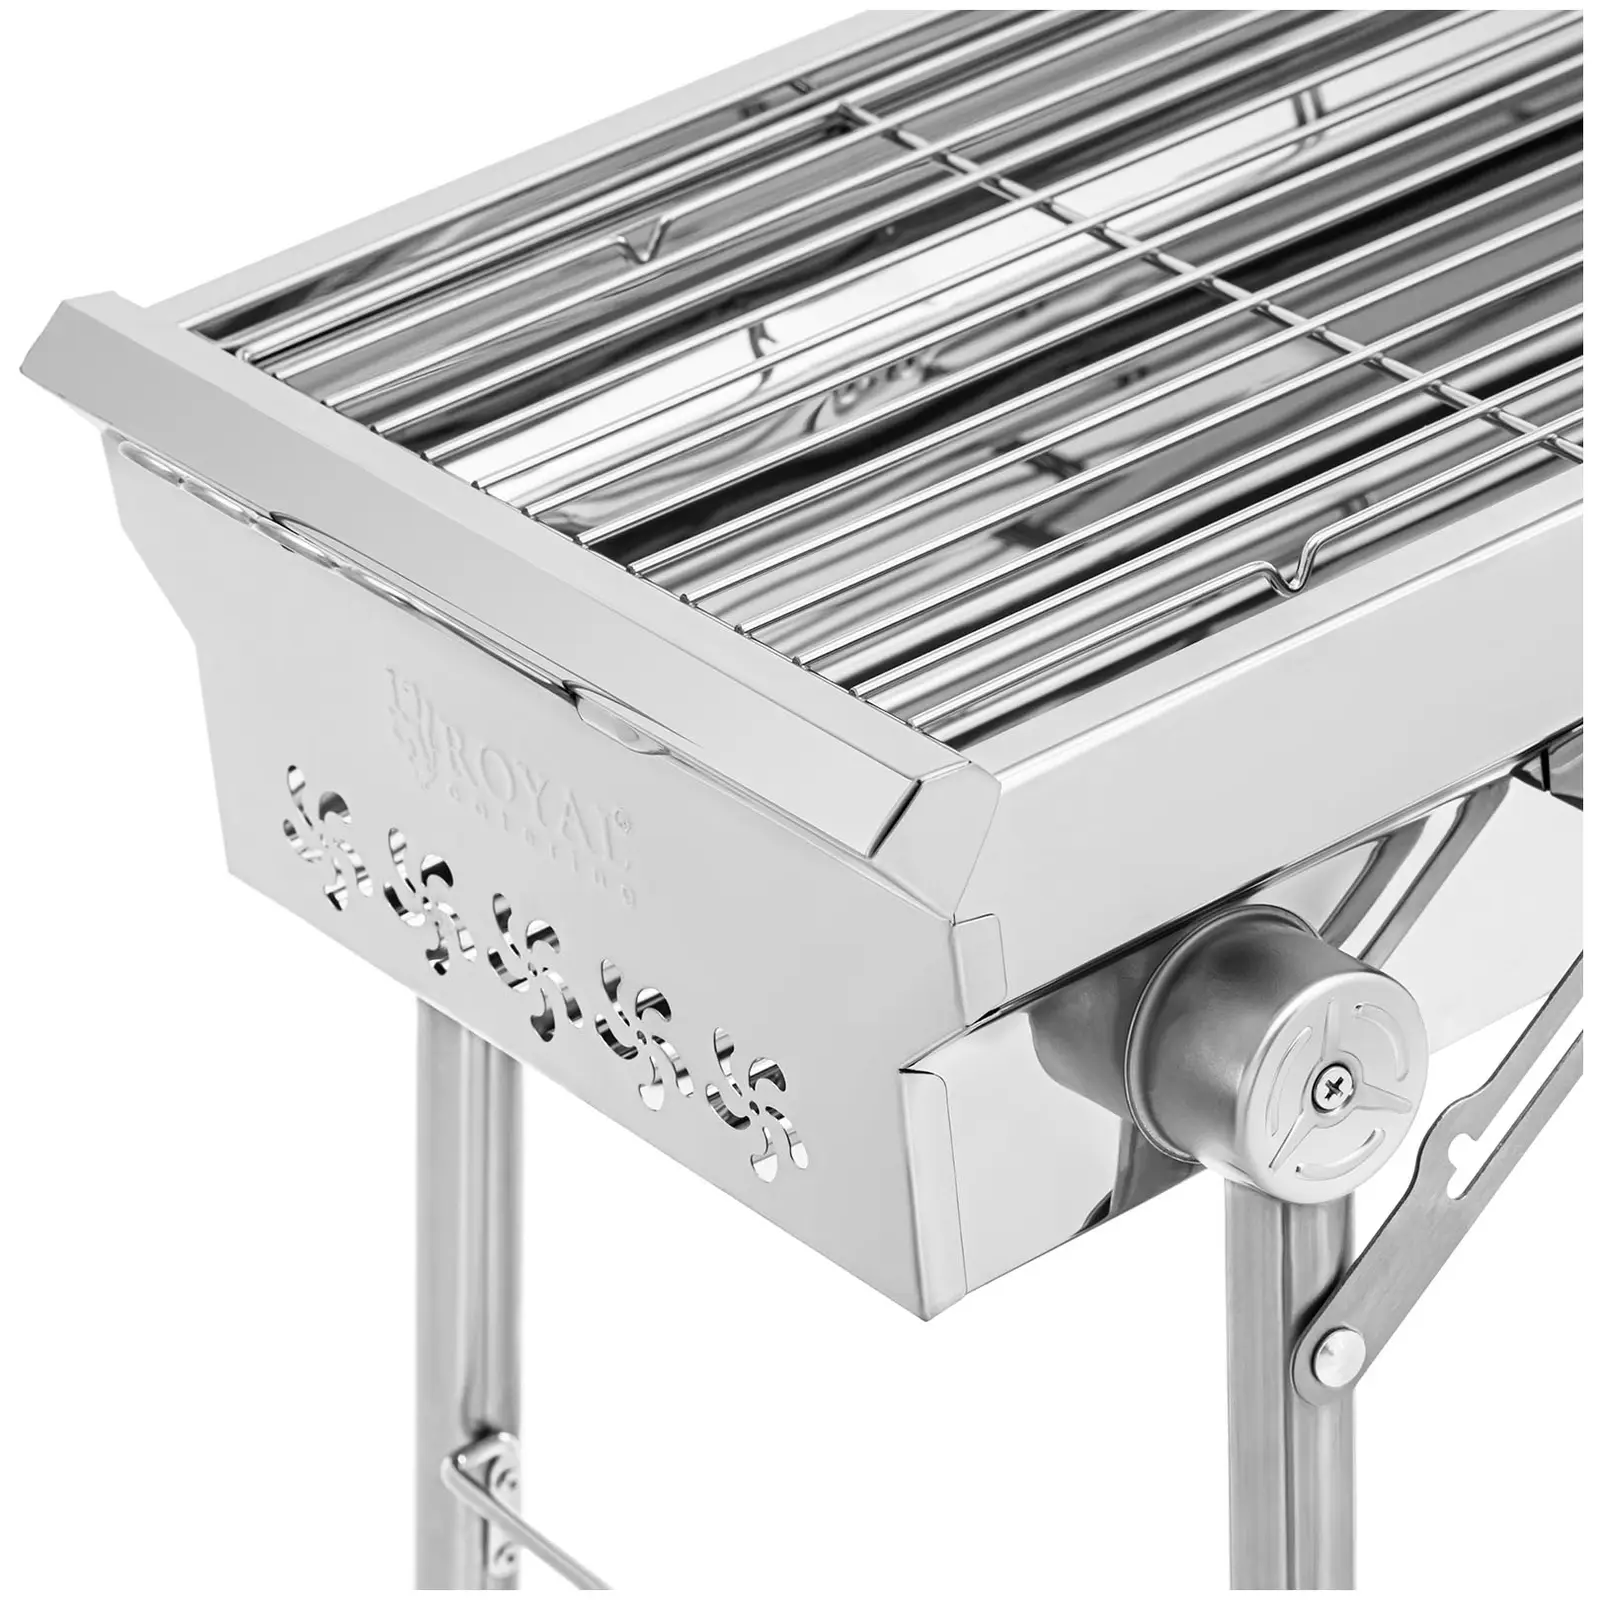 Charcoal grill - with 2 grates - 41 x 25 / 31 x 25 cm - stainless steel / galvanised steel - Royal Catering